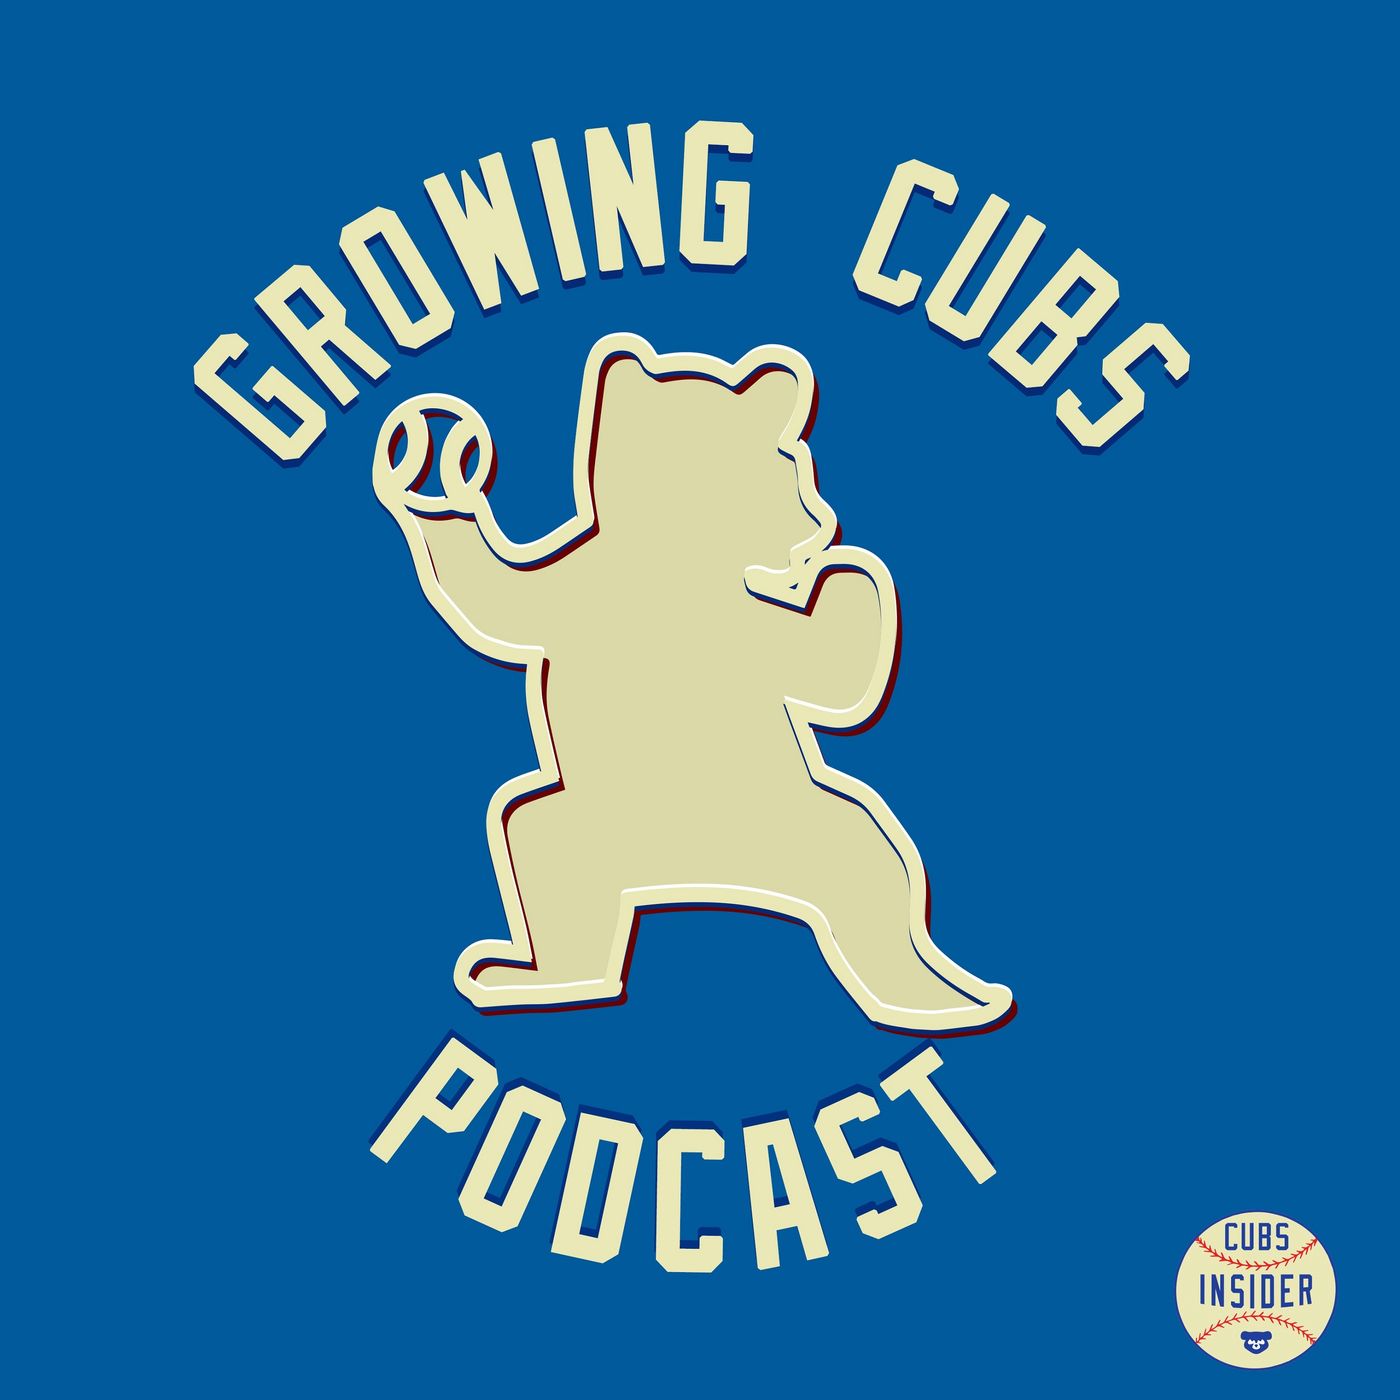 Growing Cubs: A Chicago Prospect Podcast